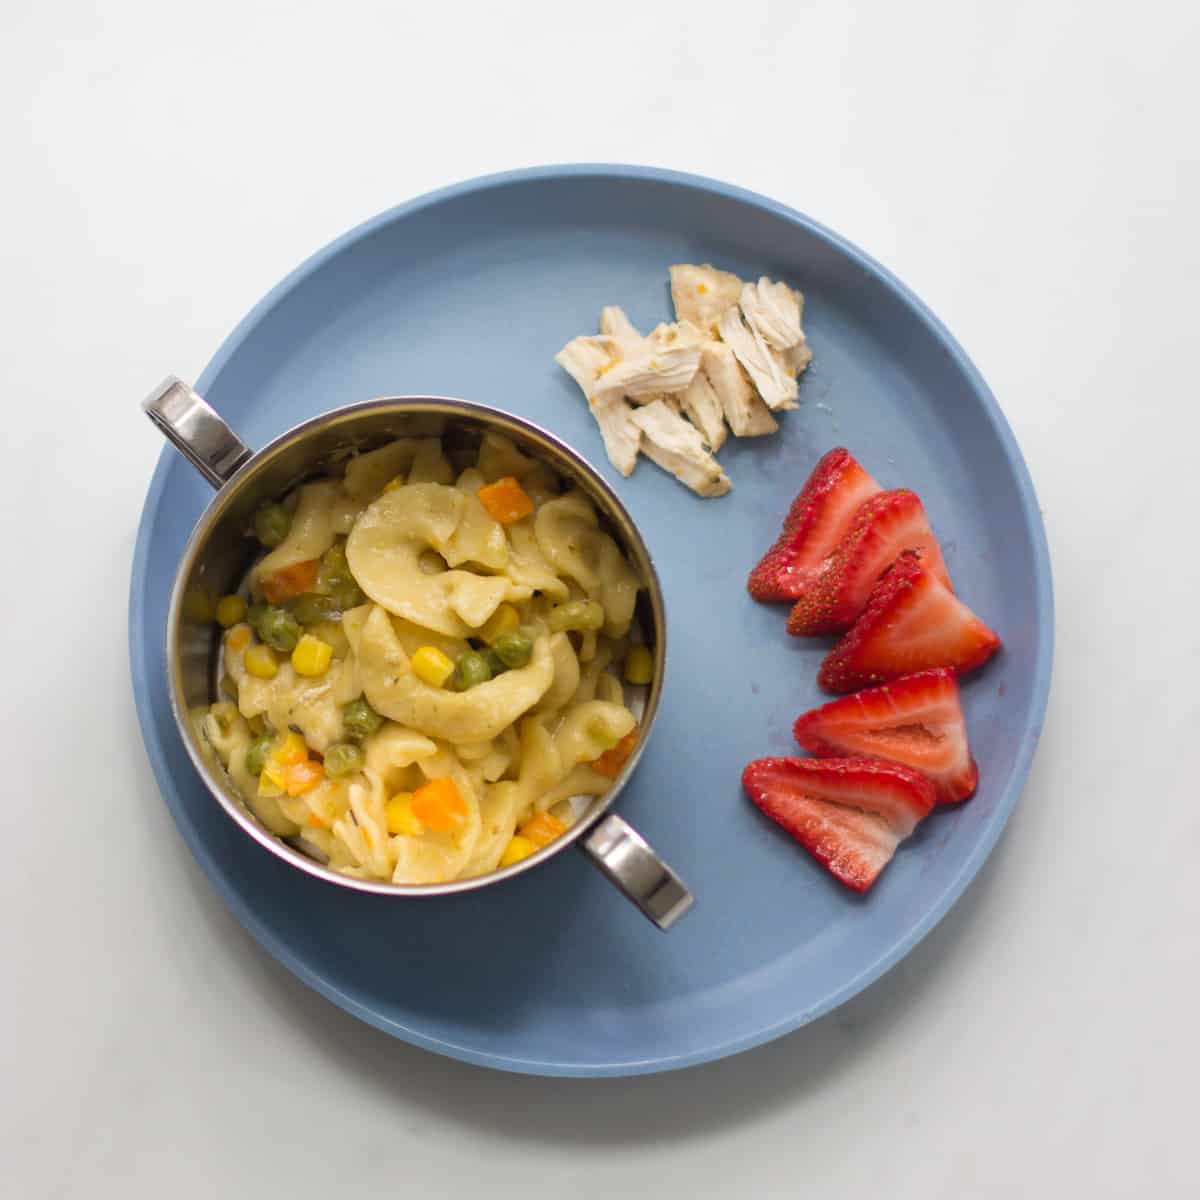 Chicken and noodles in a stainless steel bowl with sliced strawberries and chicken.